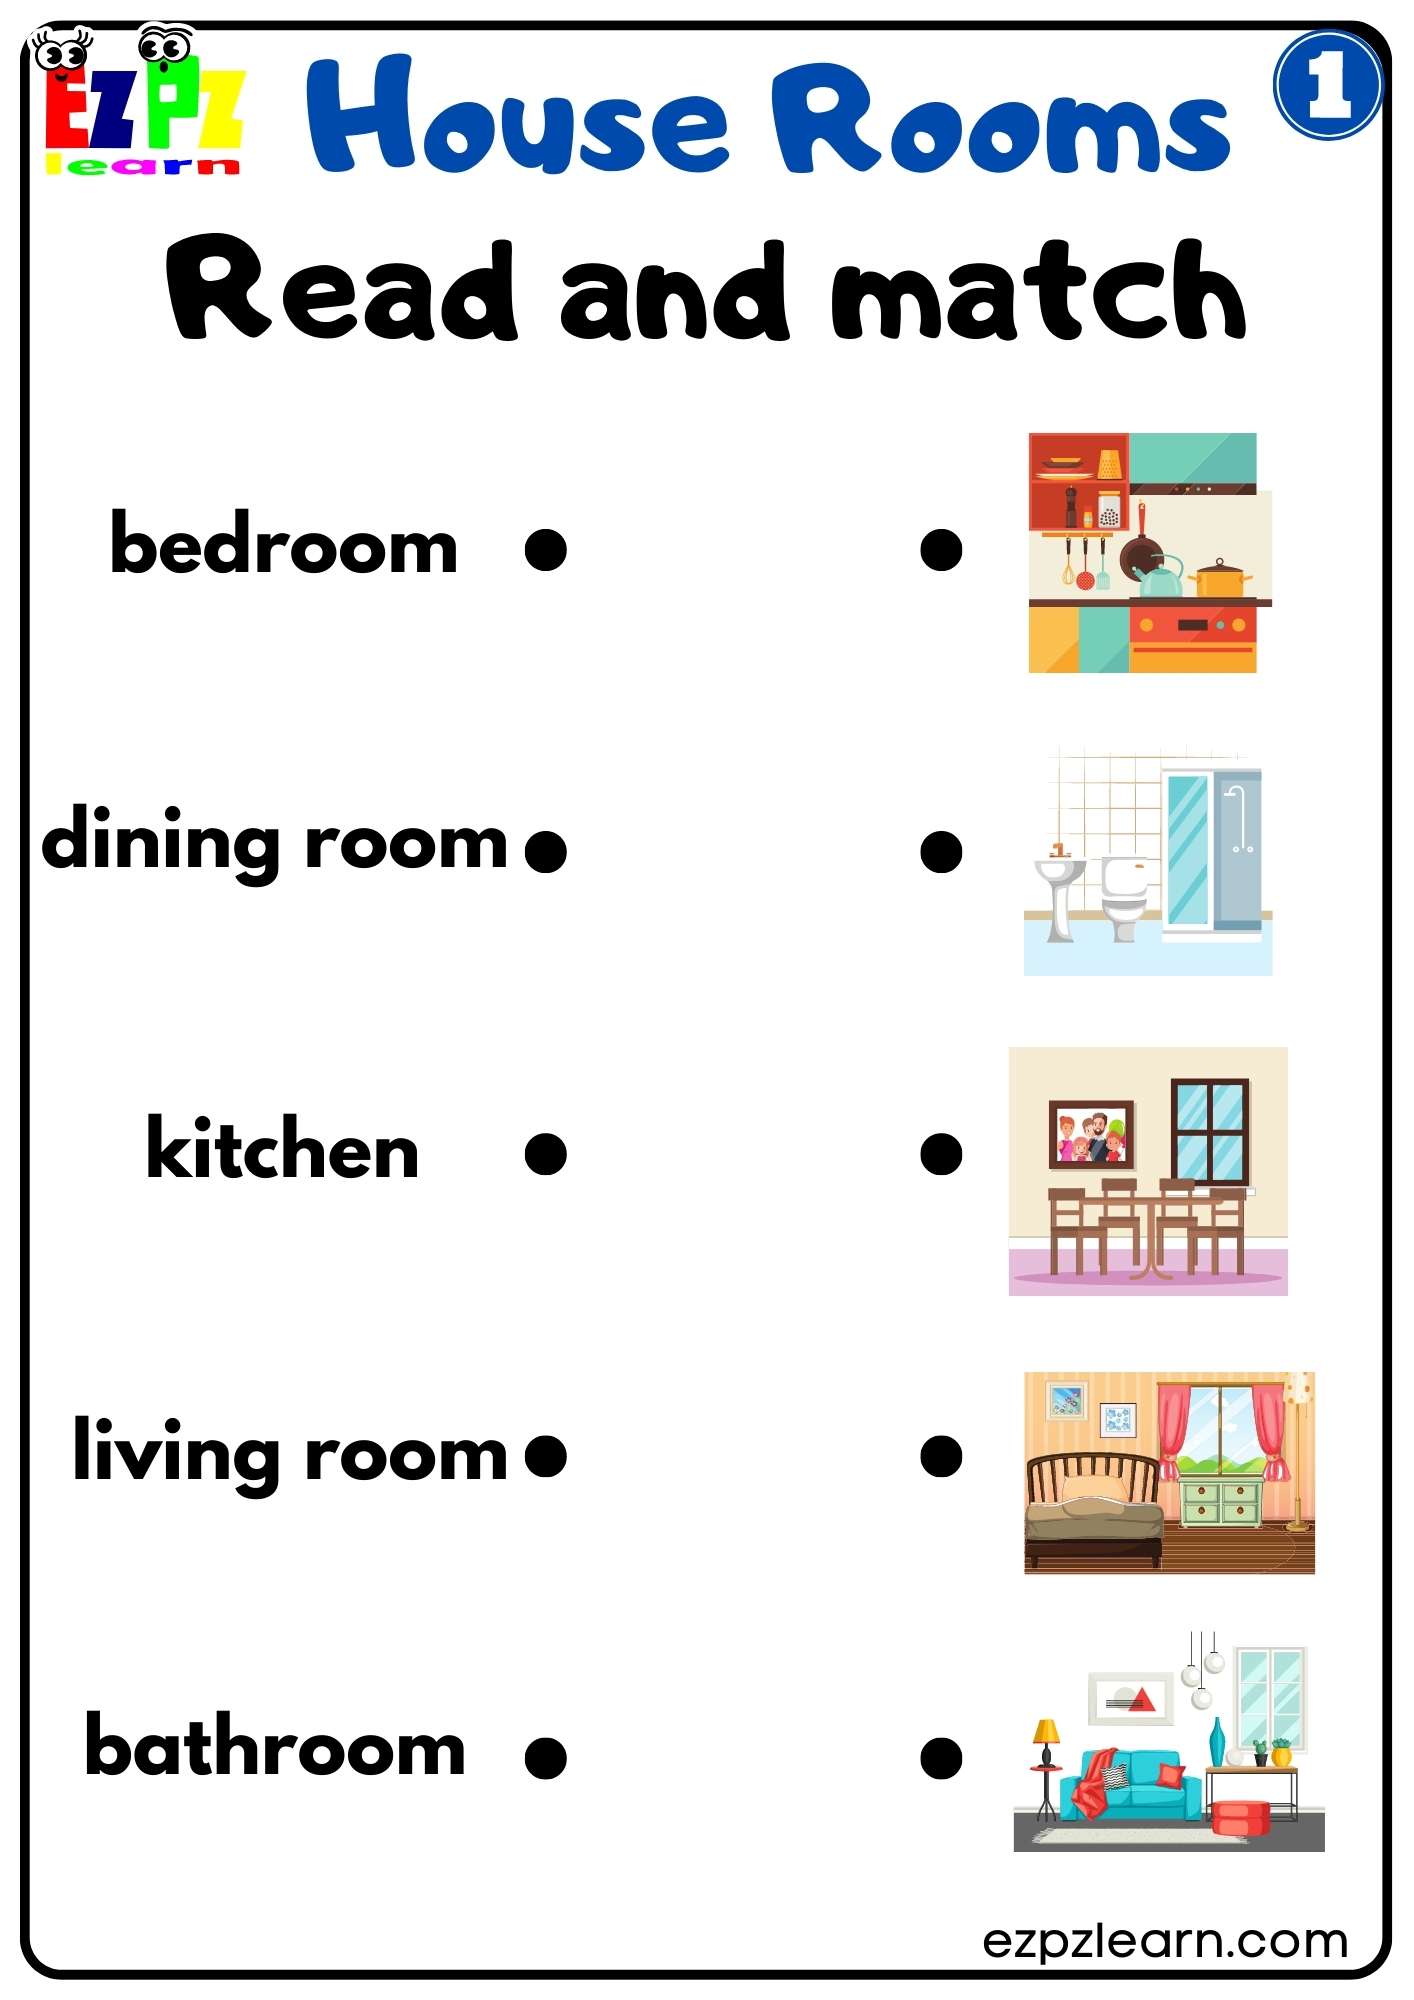 Rooms In A House English Vocabulary